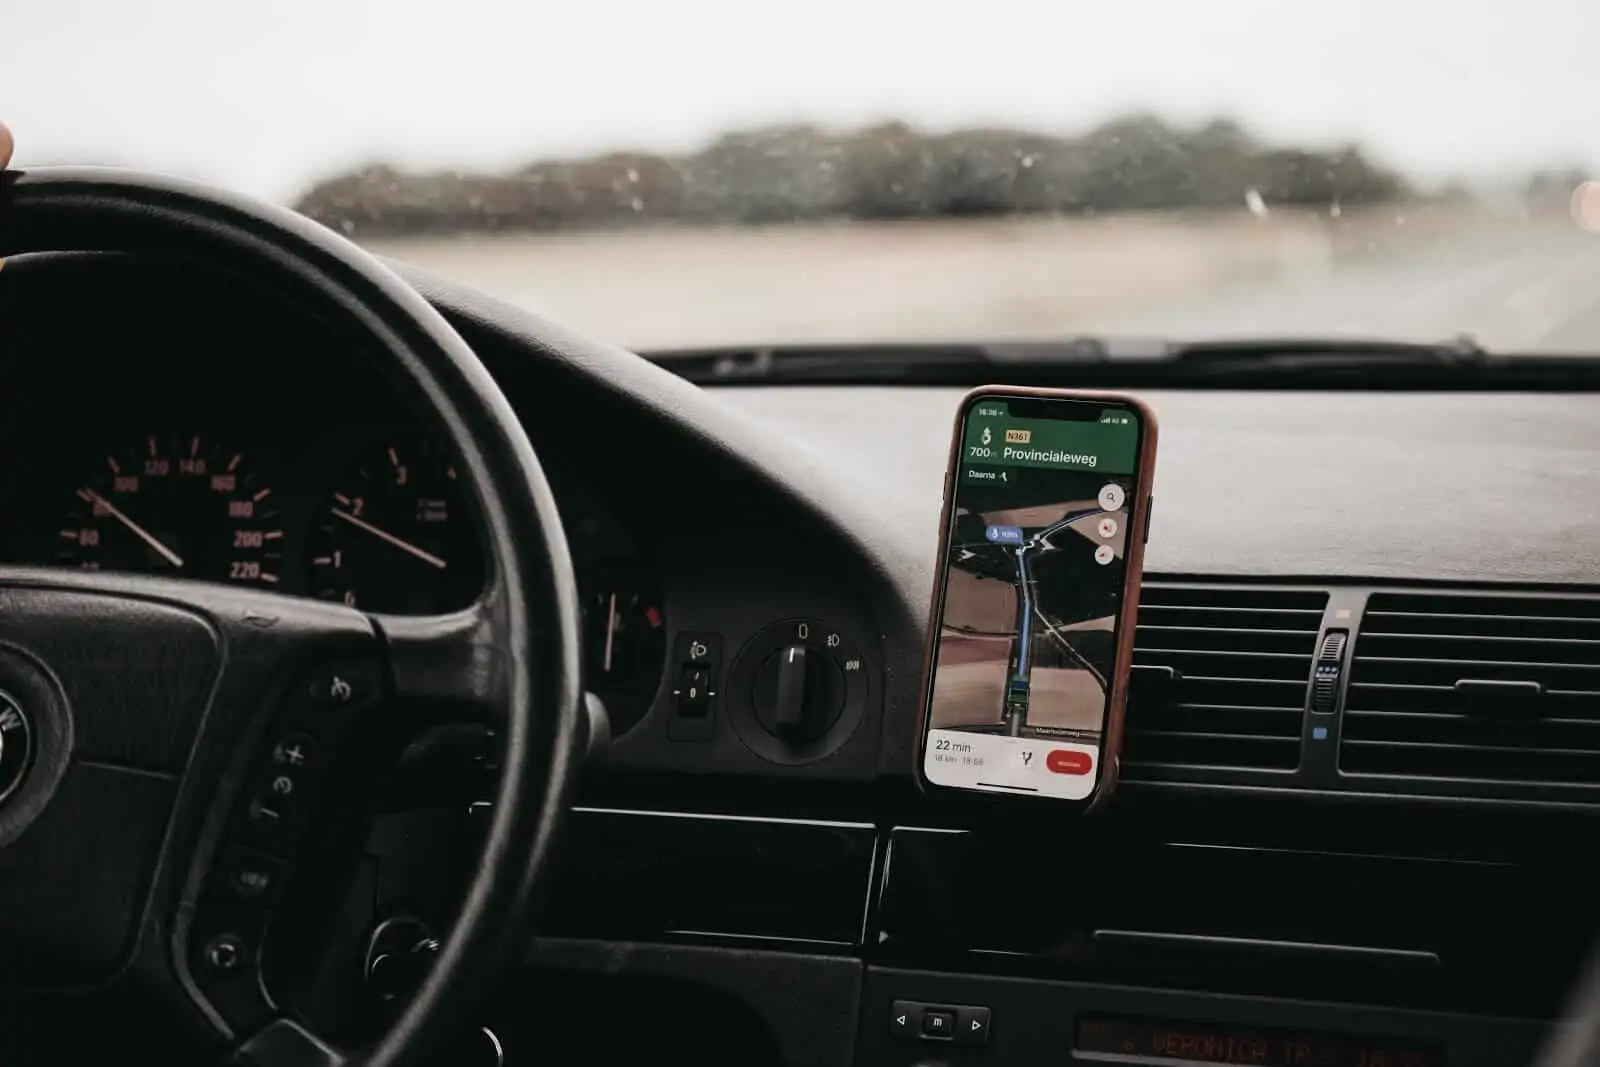 Google maps on a phone mounted on a dashboard